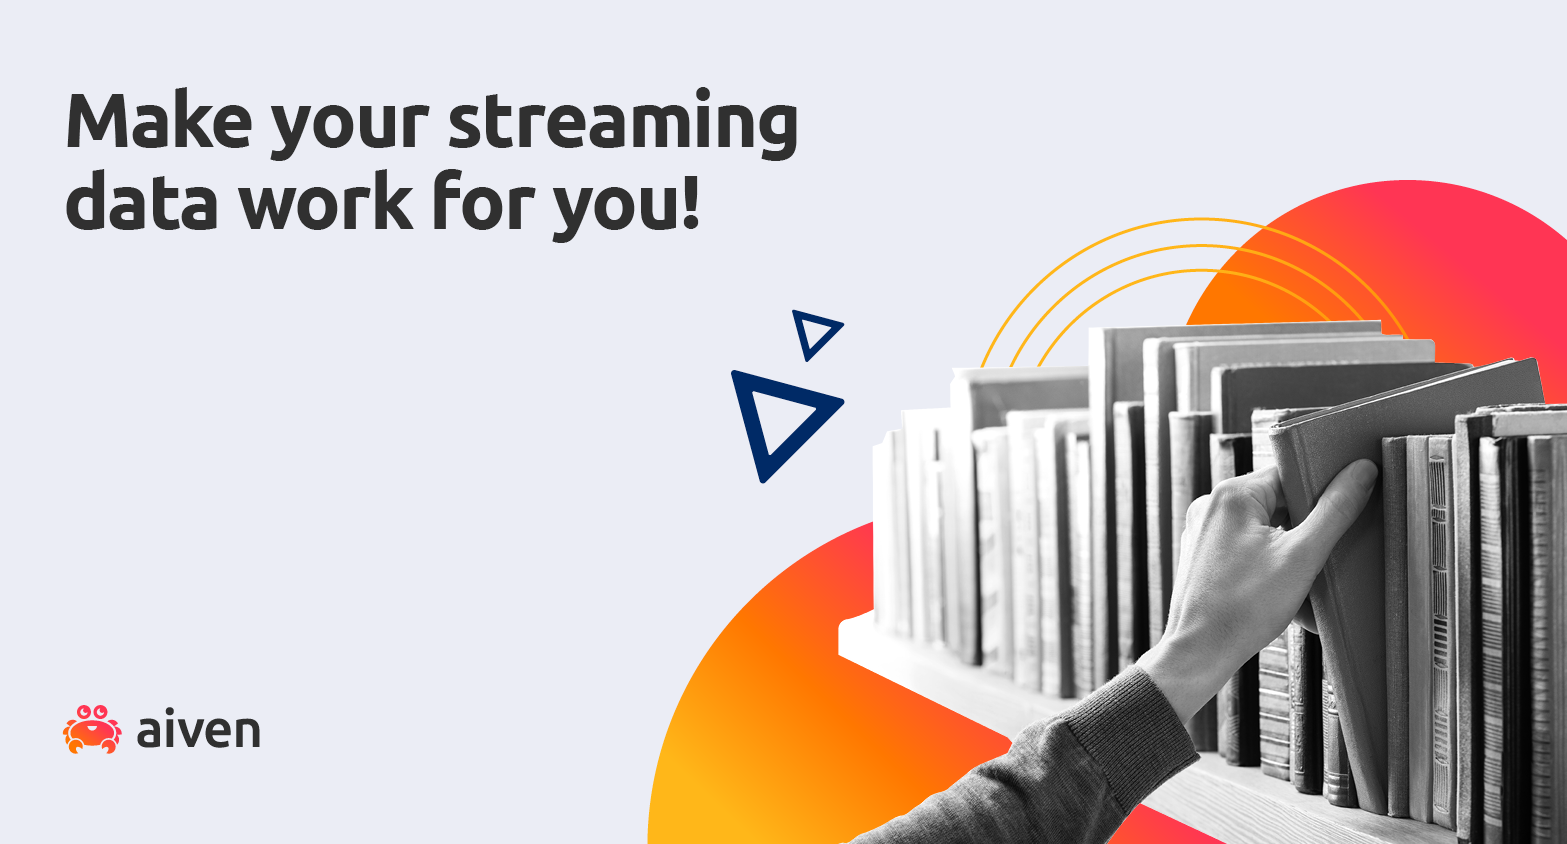 Already using Apache Kafka®? Here’s why you should be analyzing your streaming data, not just moving it around.